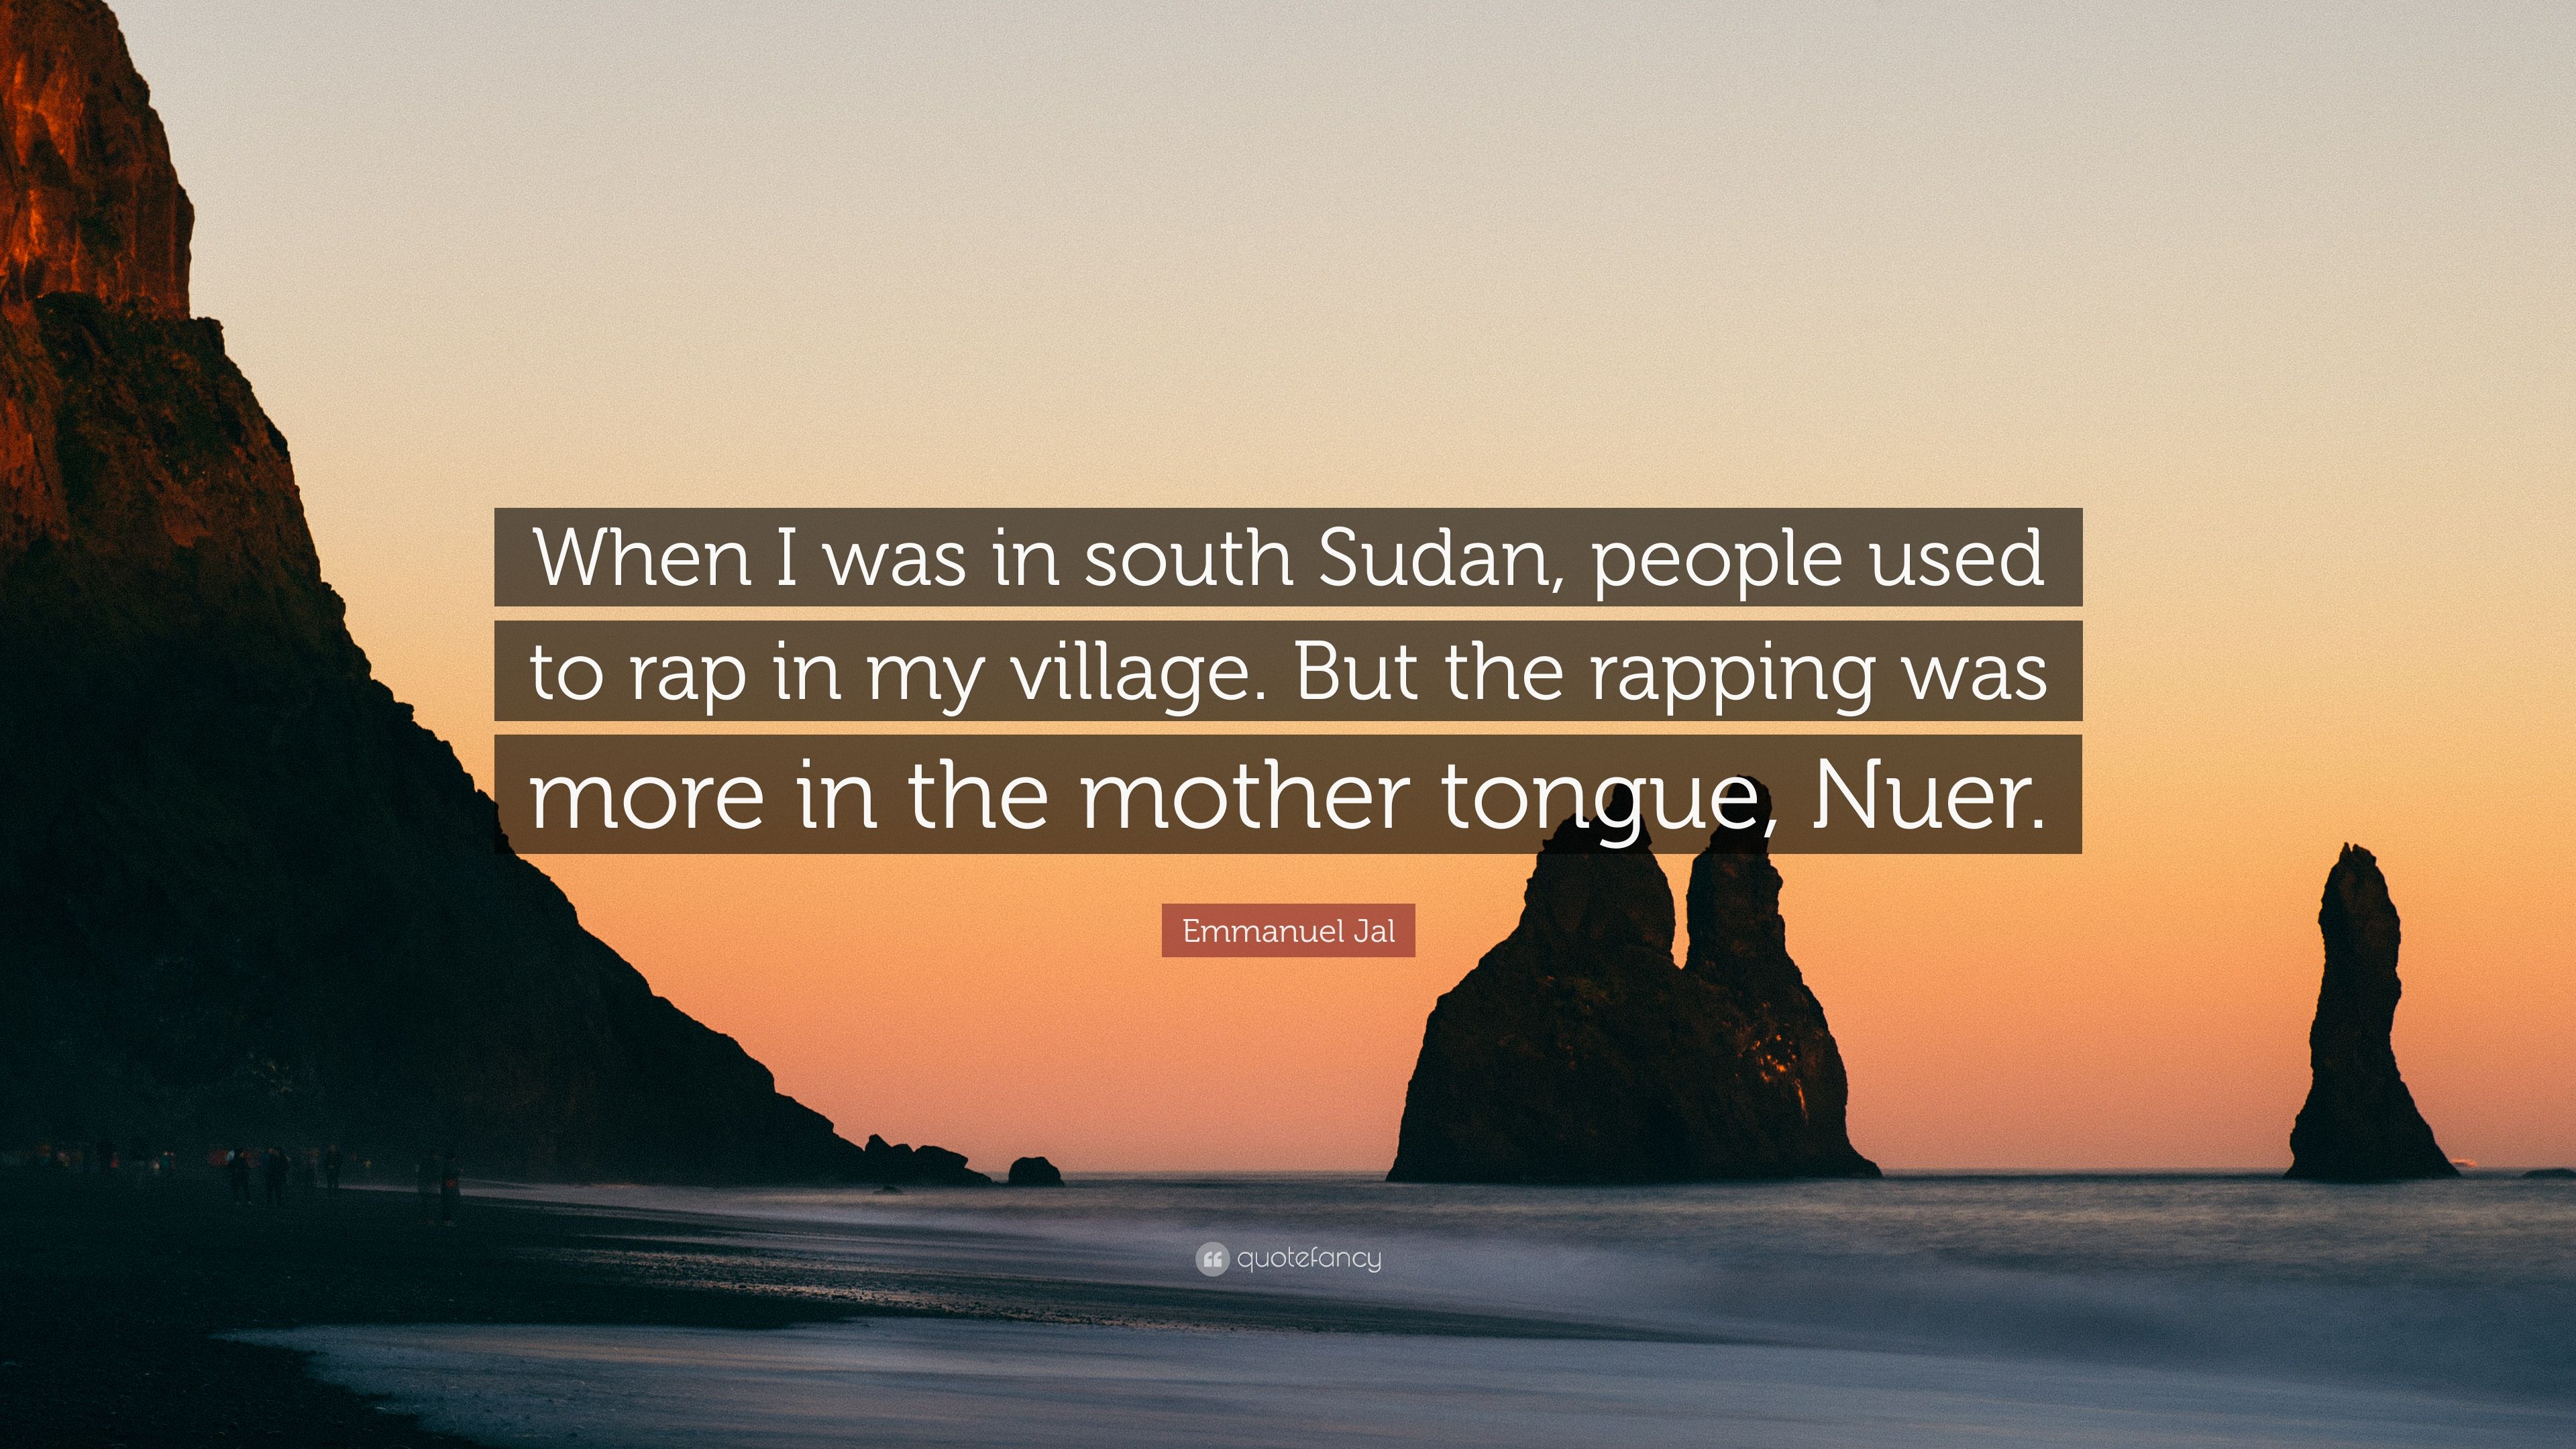 Emmanuel Jal Quote: “When I was in south Sudan, people used to rap